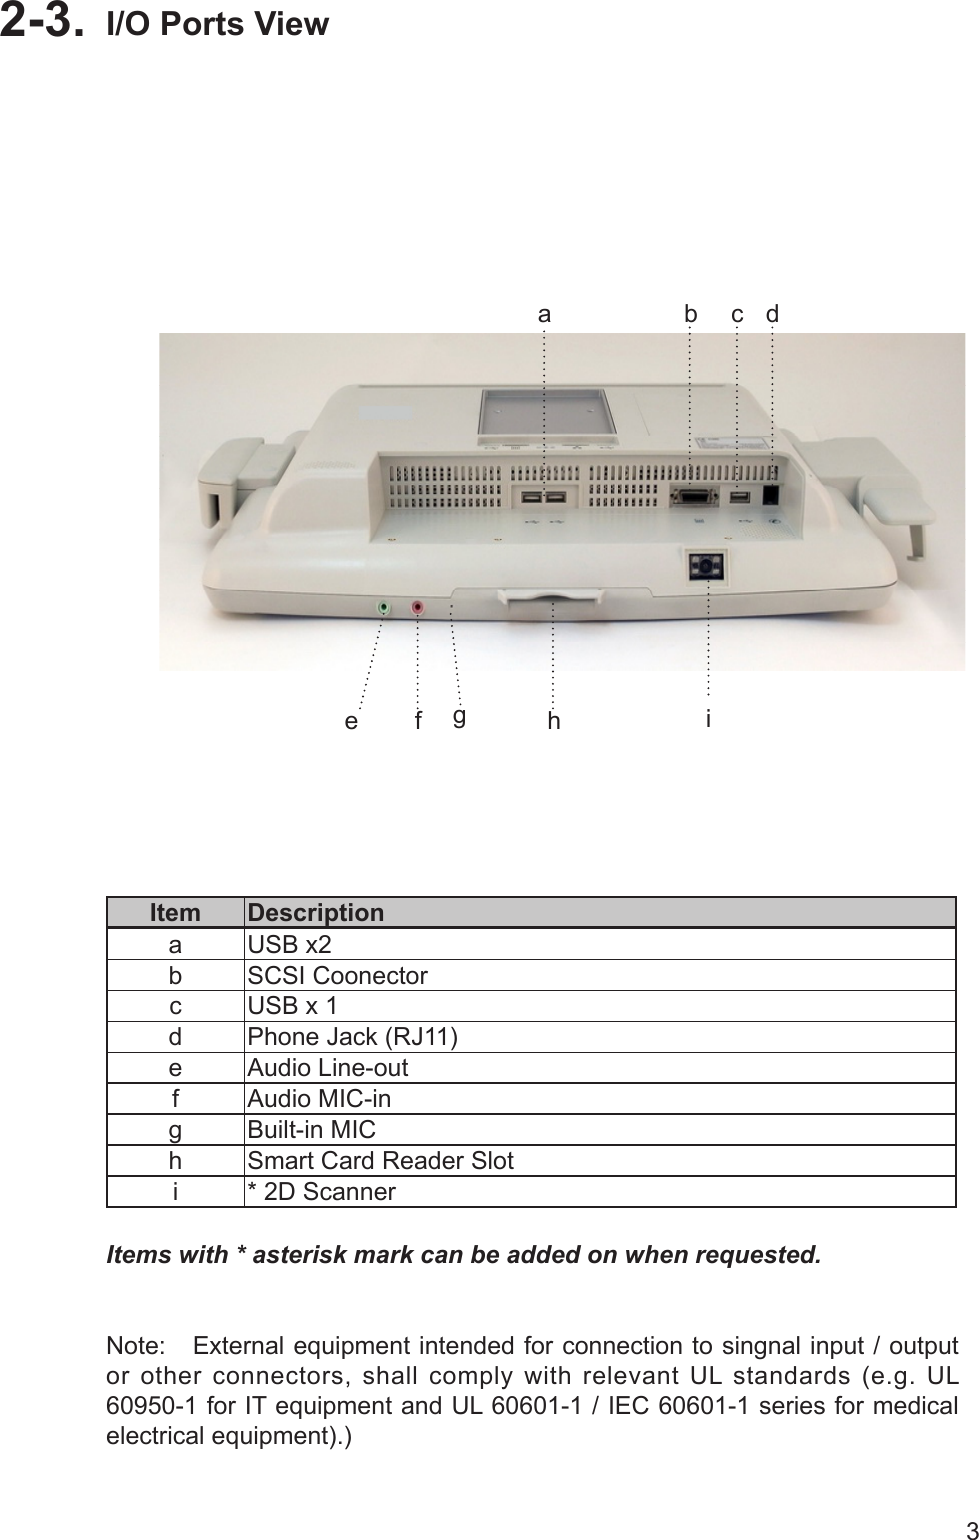 3I/O Ports View2-3. Item Descriptiona USB x2b SCSI Coonectorc USB x 1d Phone Jack (RJ11)e Audio Line-outf Audio MIC-ing Built-in MICh Smart Card Reader Sloti * 2D Scannera b c de f ghiNote:   External equipment intended for connection to singnal input / output or other connectors, shall comply with relevant UL standards (e.g. UL 60950-1 for IT equipment and UL 60601-1 / IEC 60601-1 series for medical electrical equipment).)Items with * asterisk mark can be added on when requested.